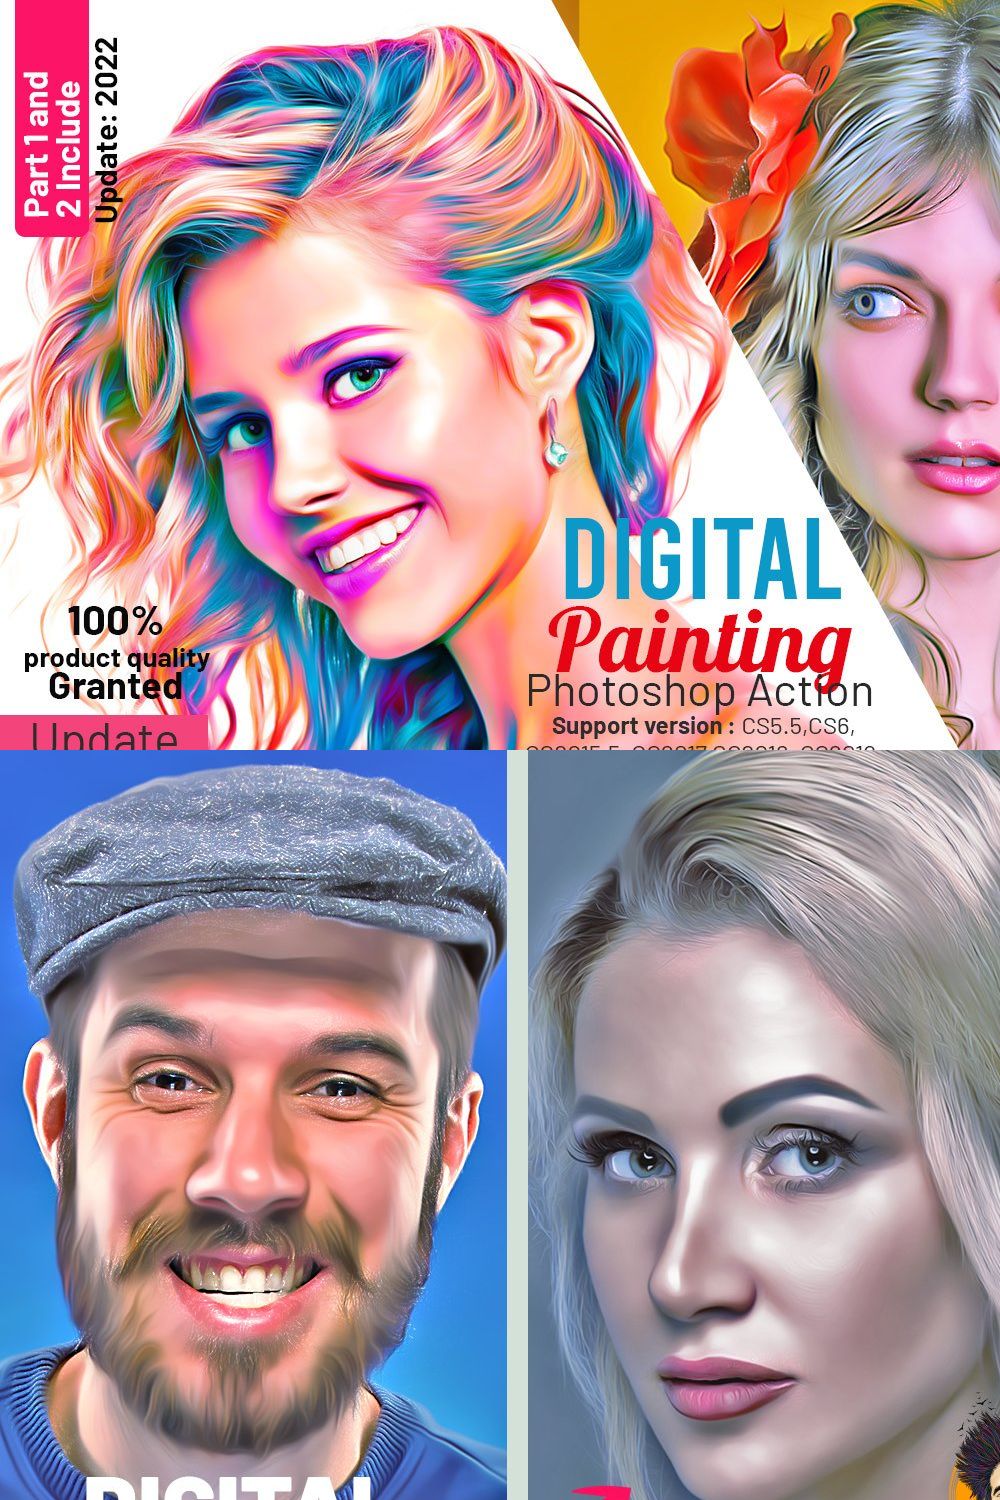 Digital Painting Photoshop Action pinterest preview image.